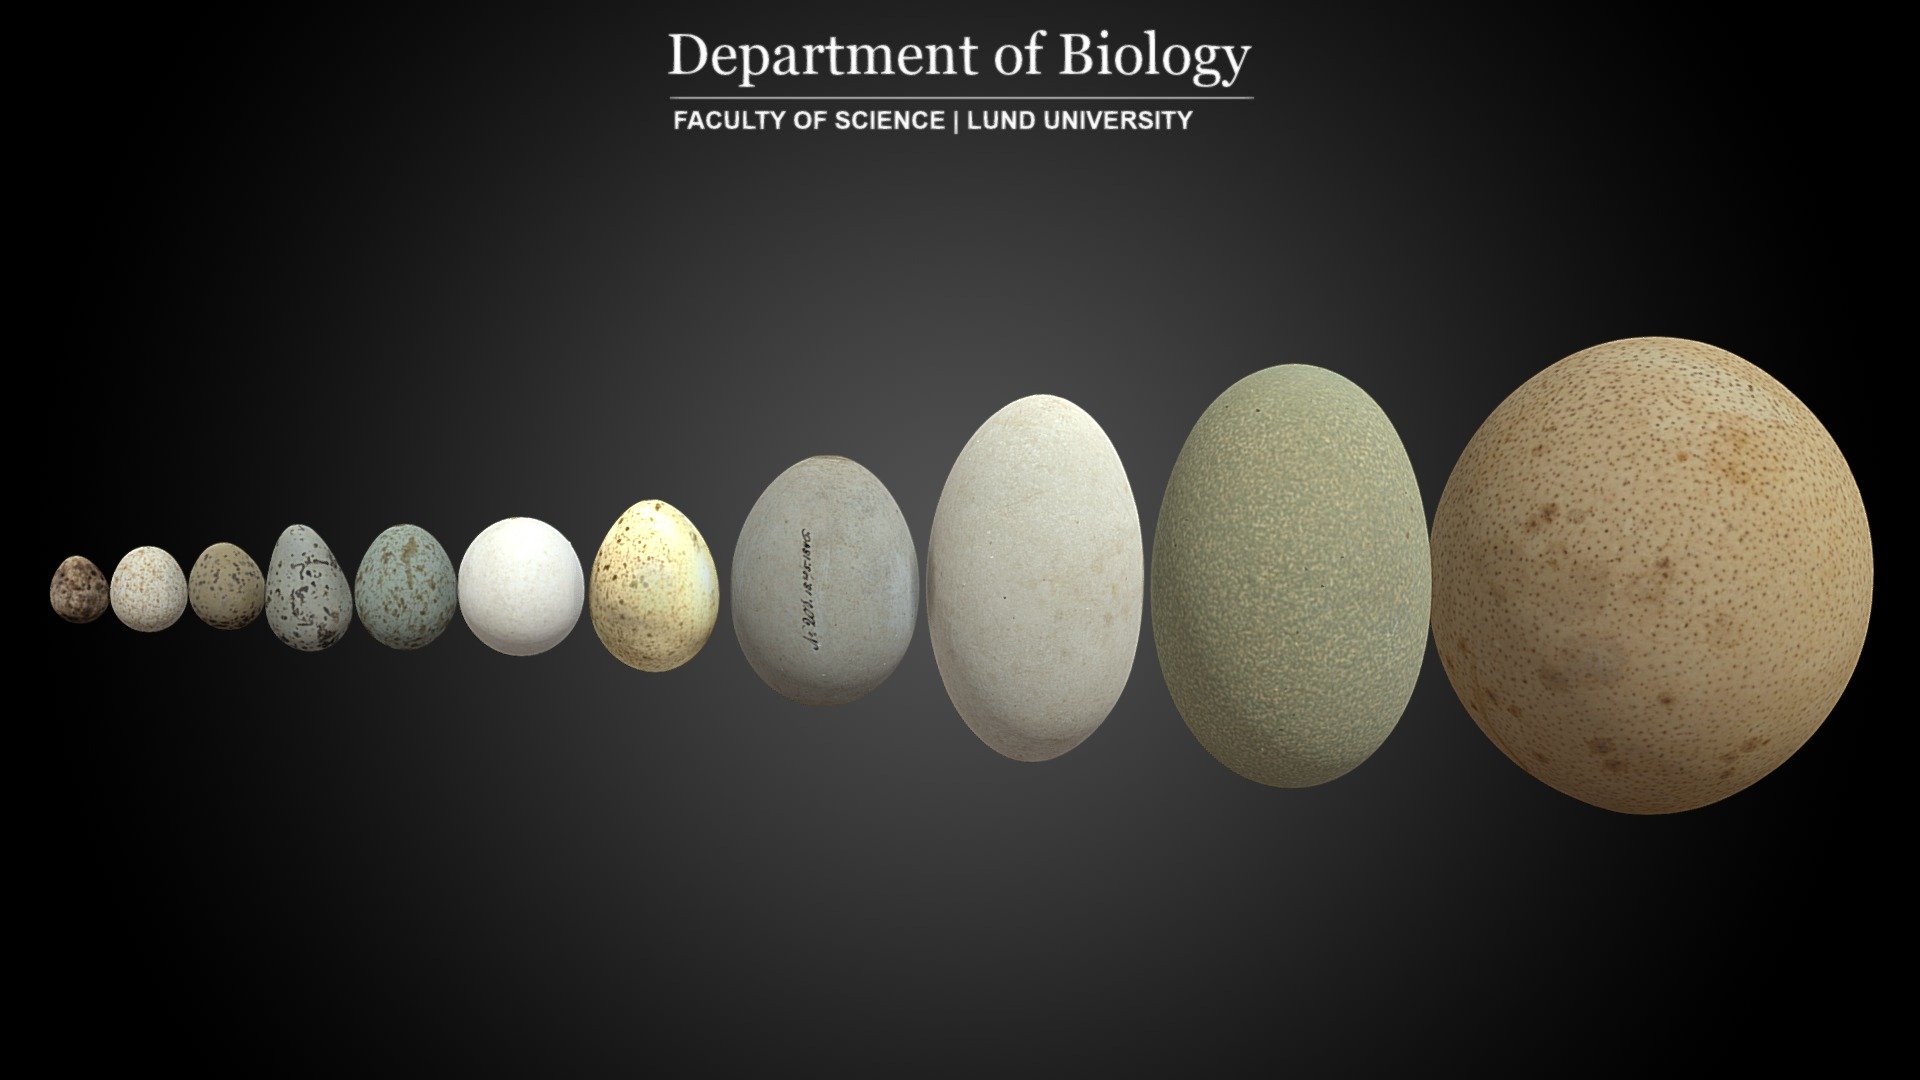 Scans of birds' eggs from the Biological Museum at Lund University, Sweden 3d model